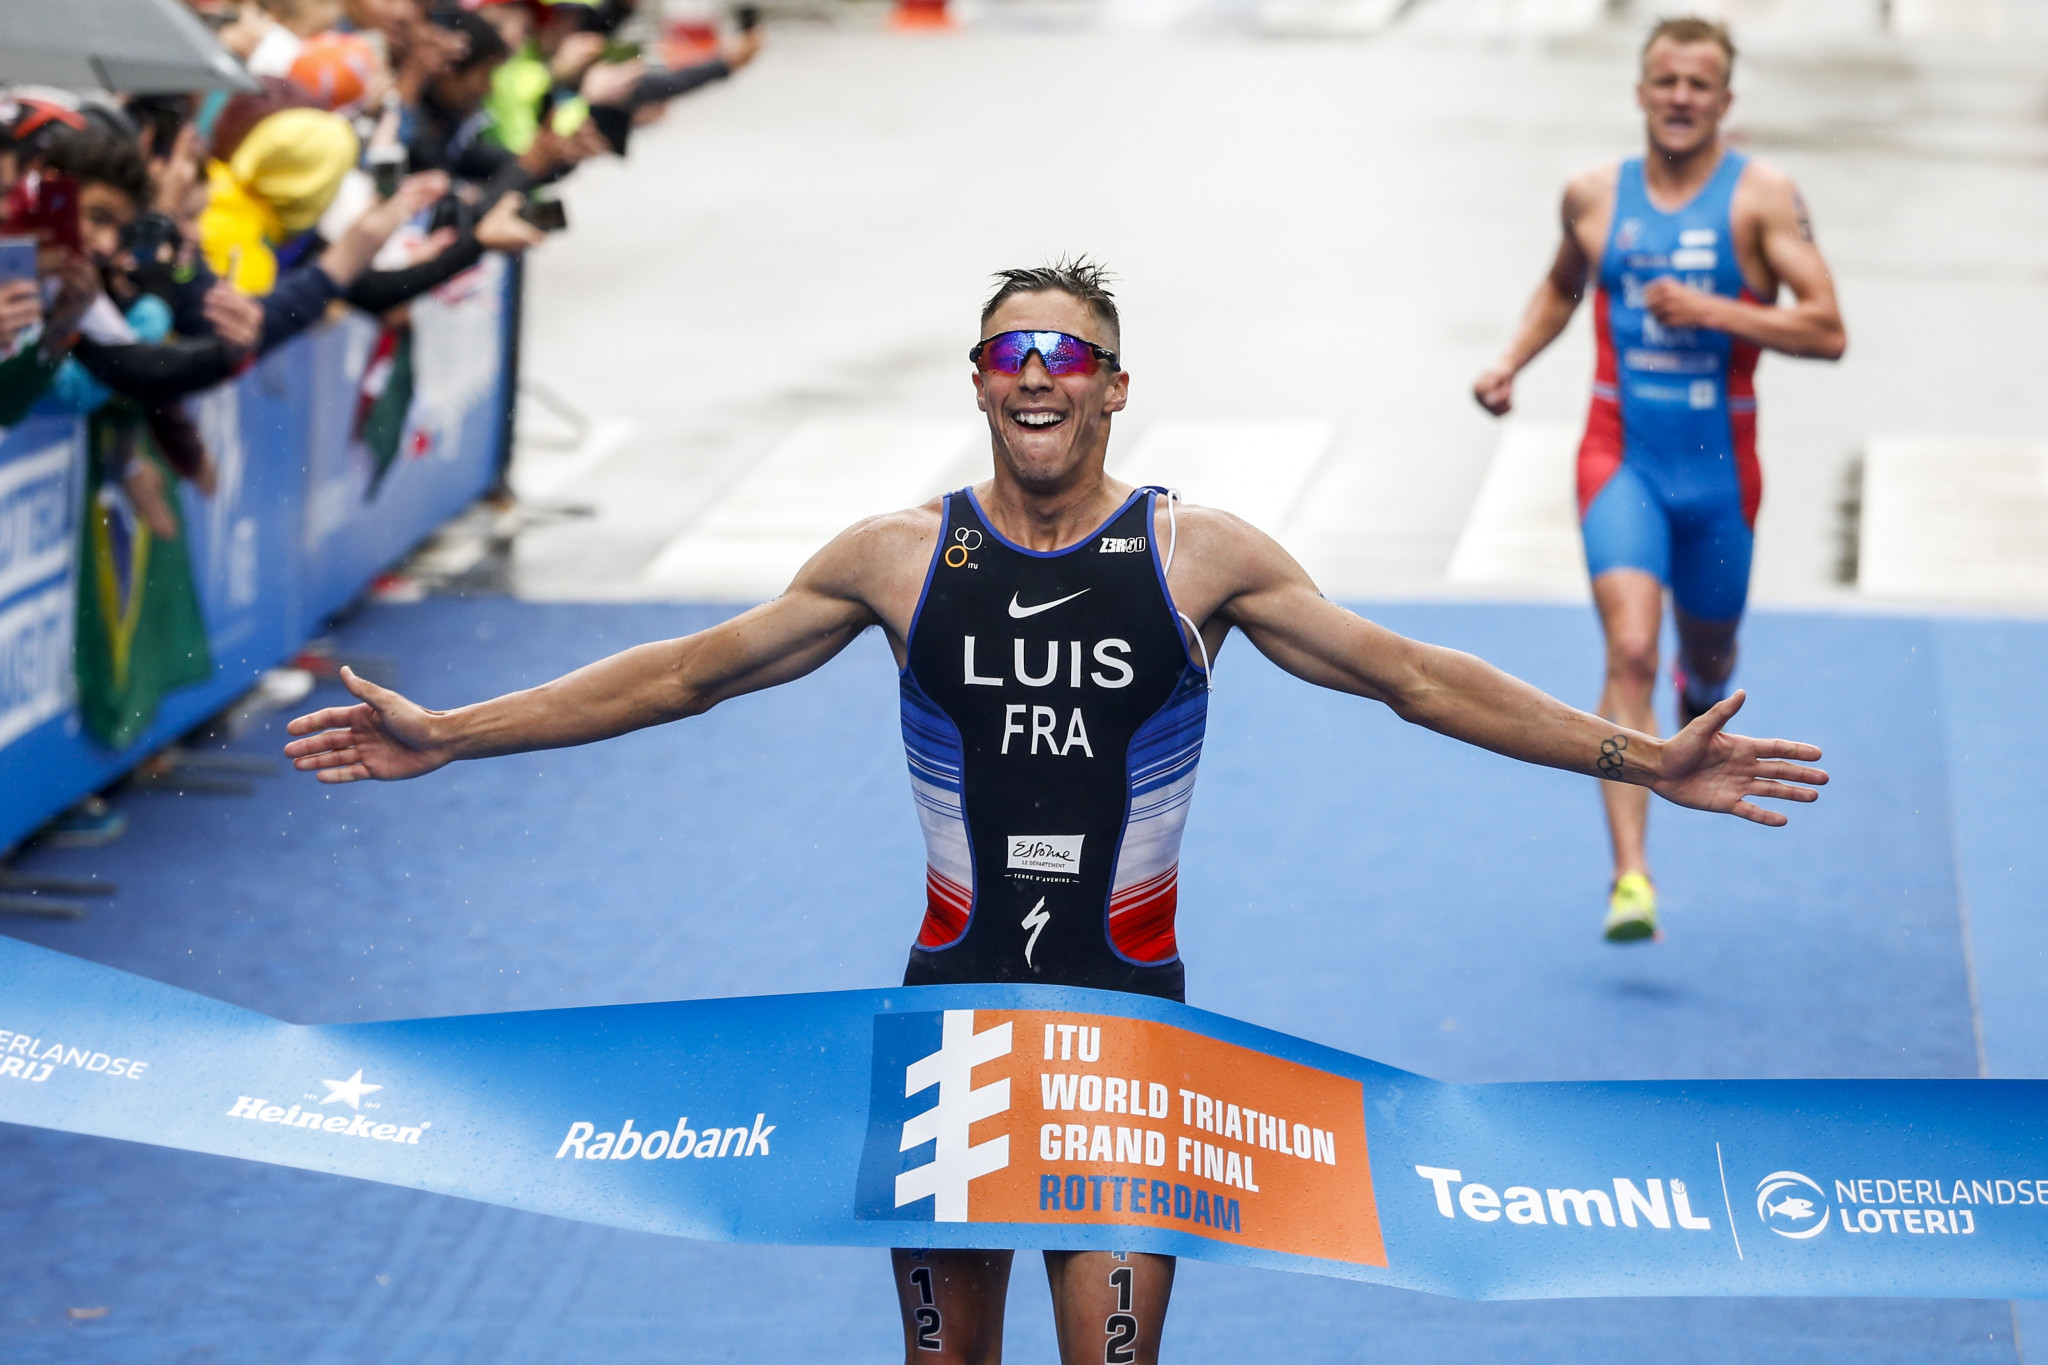 The ITU are inviting bids for the World Triathlon Grand Final ©Getty Images